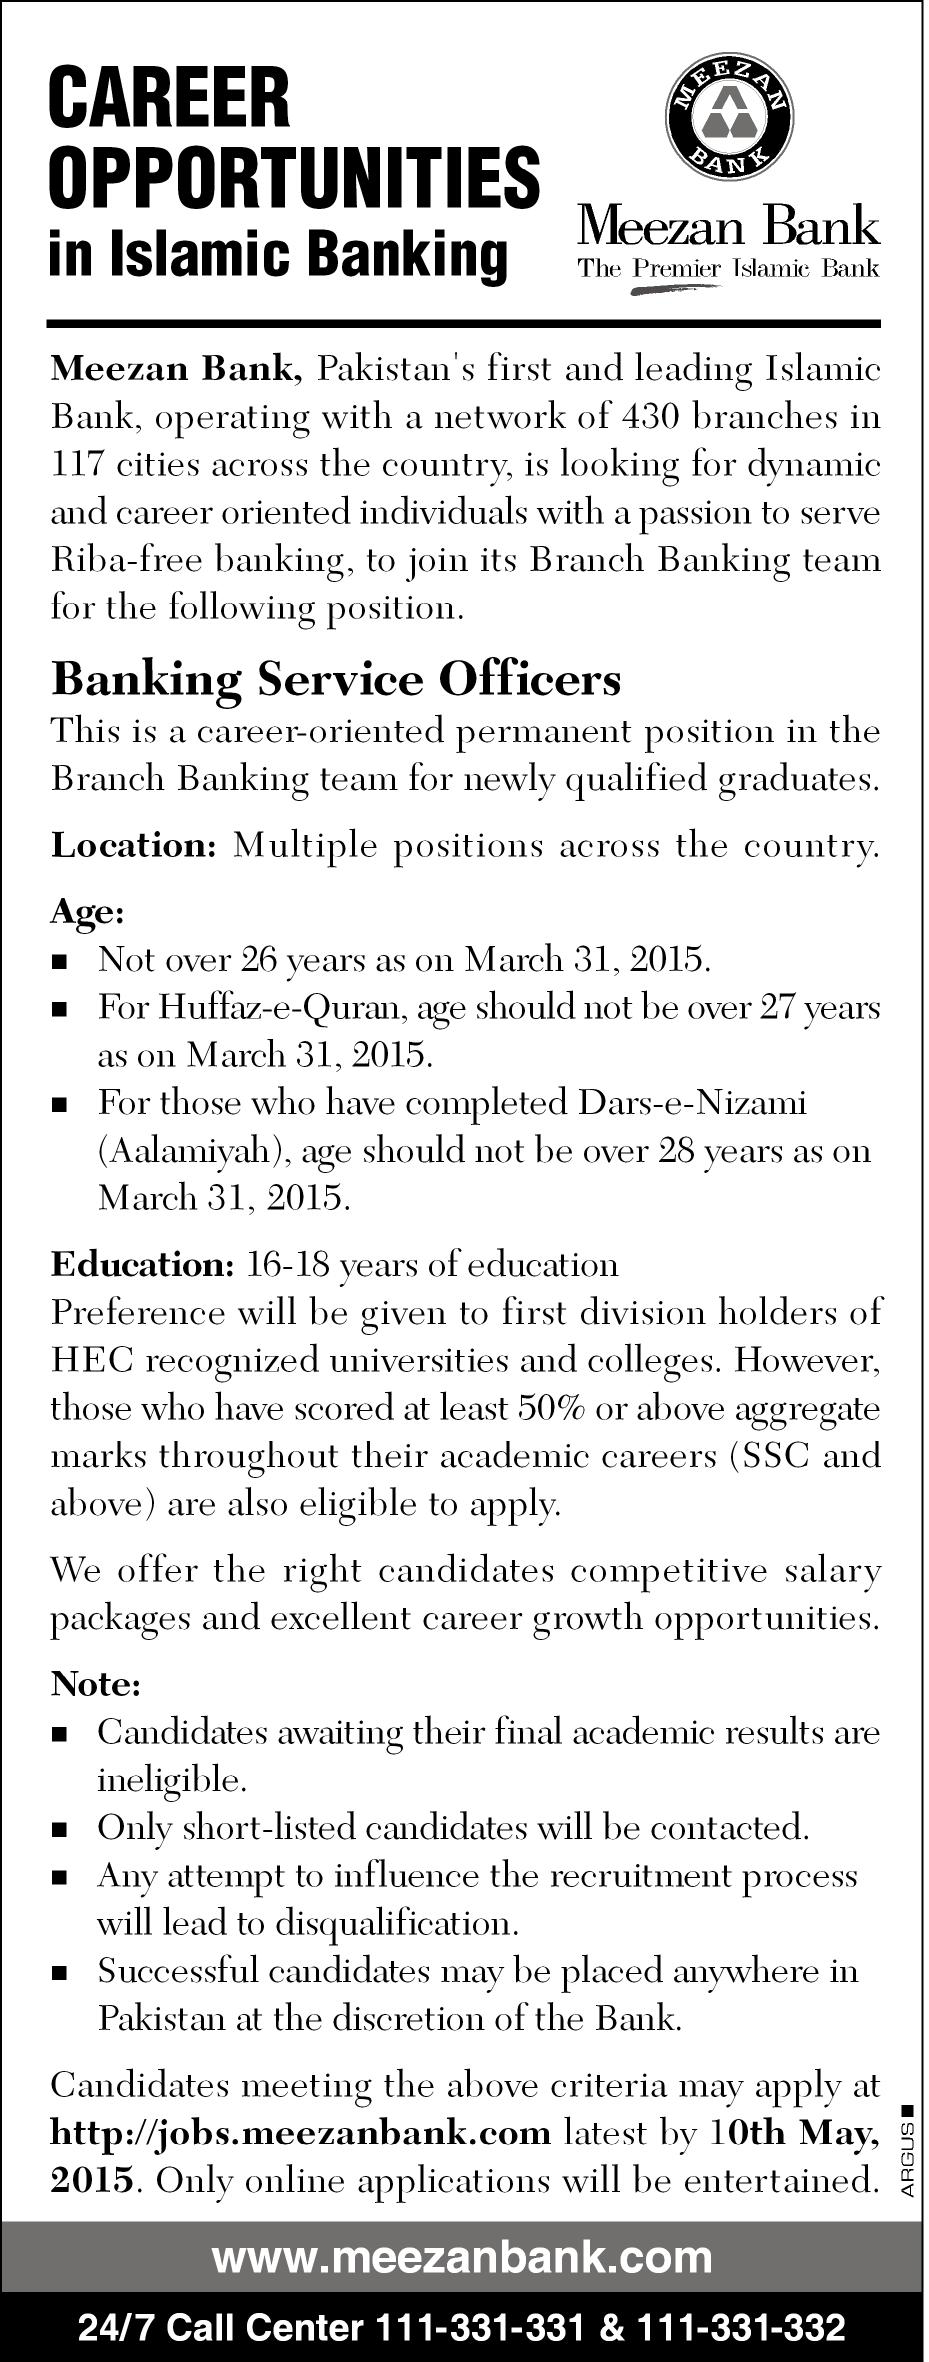 Career Opportunities in Islamic Banking 2015